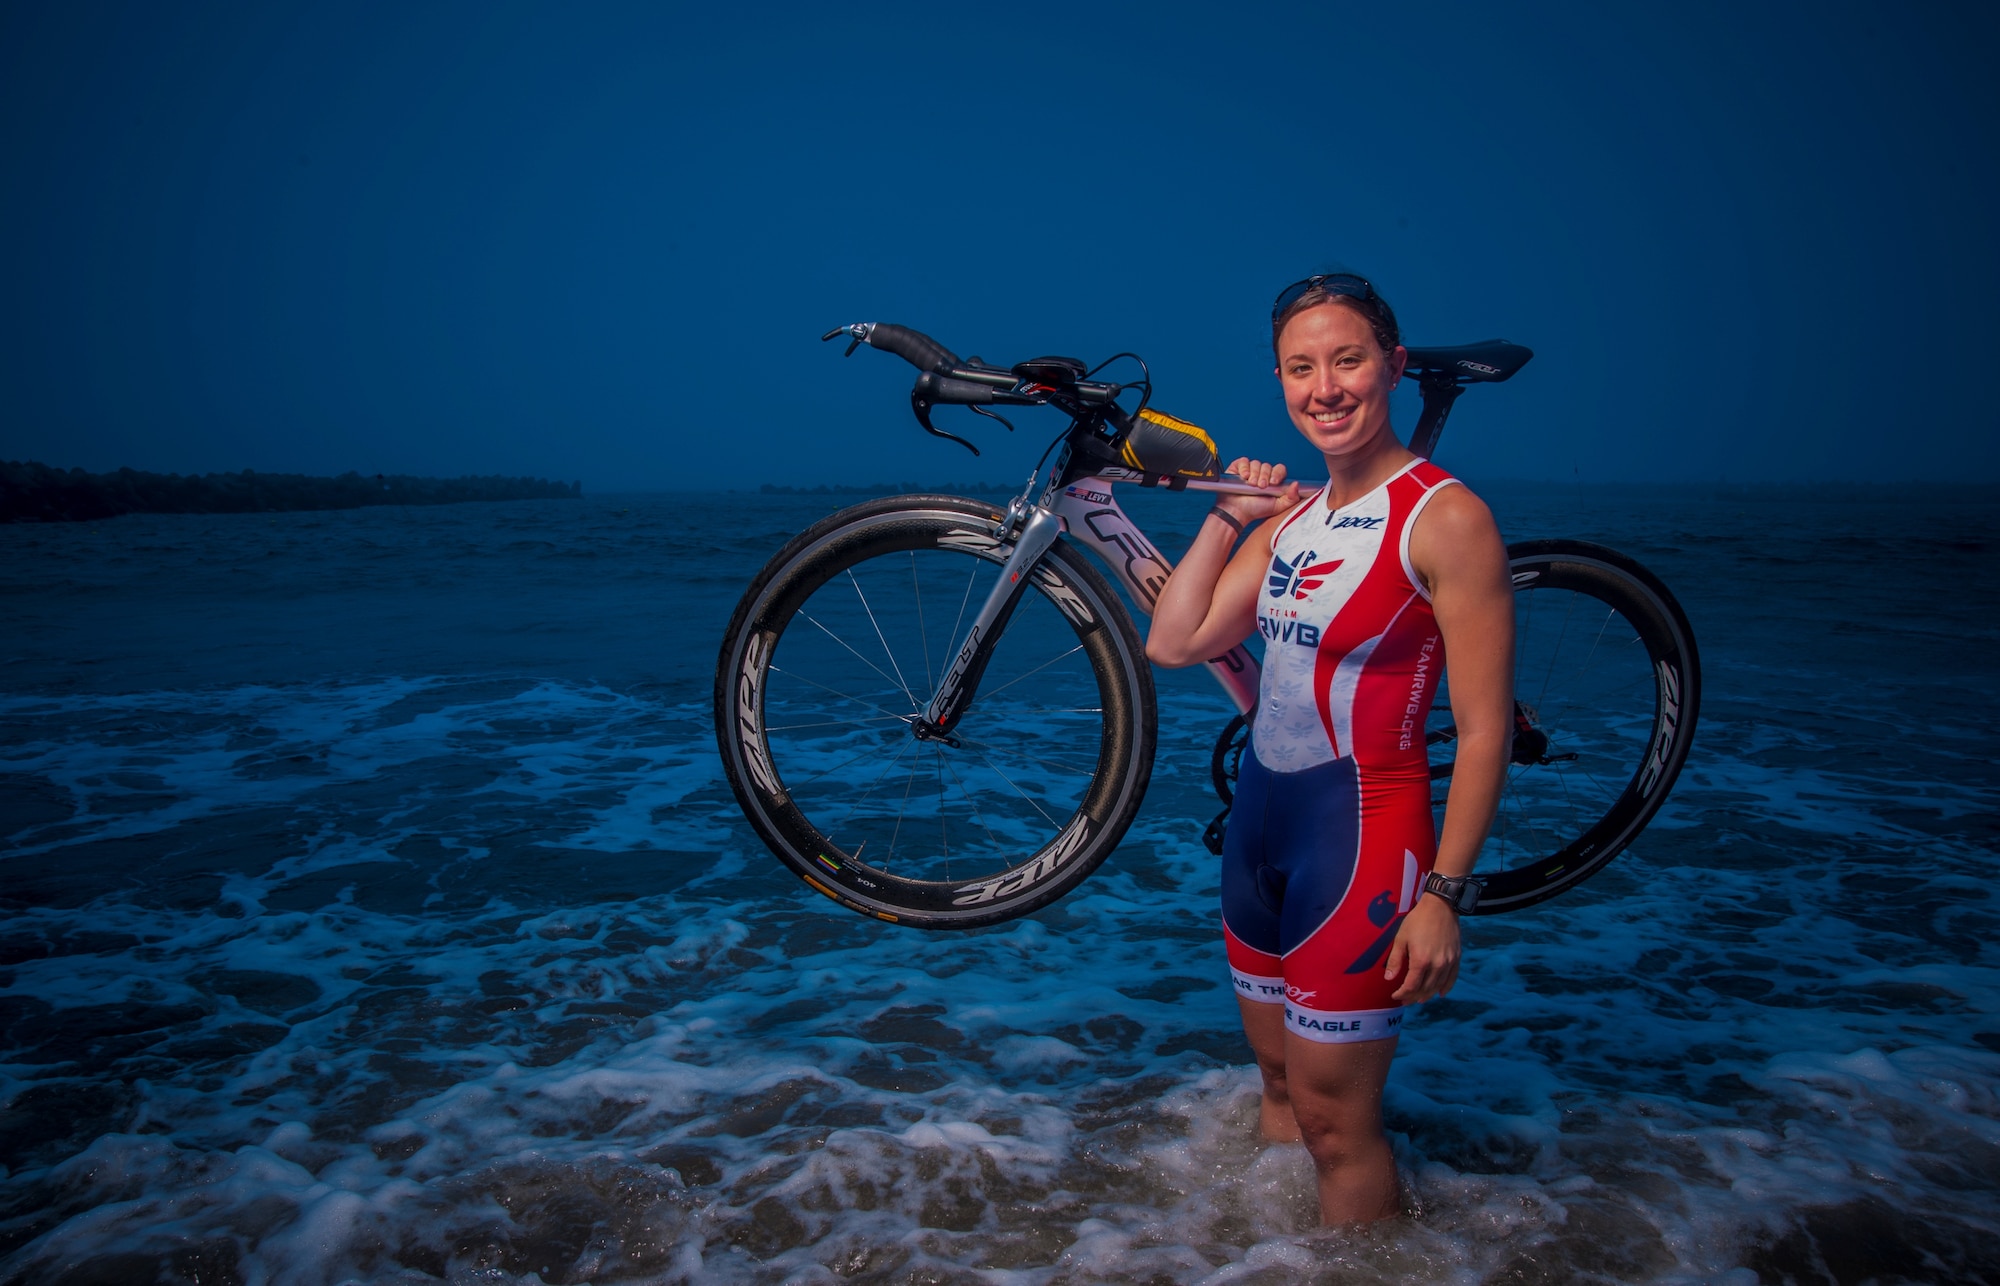 Capt. Hila Levy, 35th Operations Support Squadron, poses with her triathlon racing bike in the Pacific Ocean at Miss Veedol Beach, Japan, July 25, 2013. Levy qualified to compete in the 2013 Ironman World Championships on Oct. 12 in Kailua-Kona, Hawaii – a grueling triathlon made up of a 2.4-mile rough water swim, 112 miles of bike racing and a 26.2-mile marathon. (U.S. Air Force photo/Senior Airman Derek VanHorn)